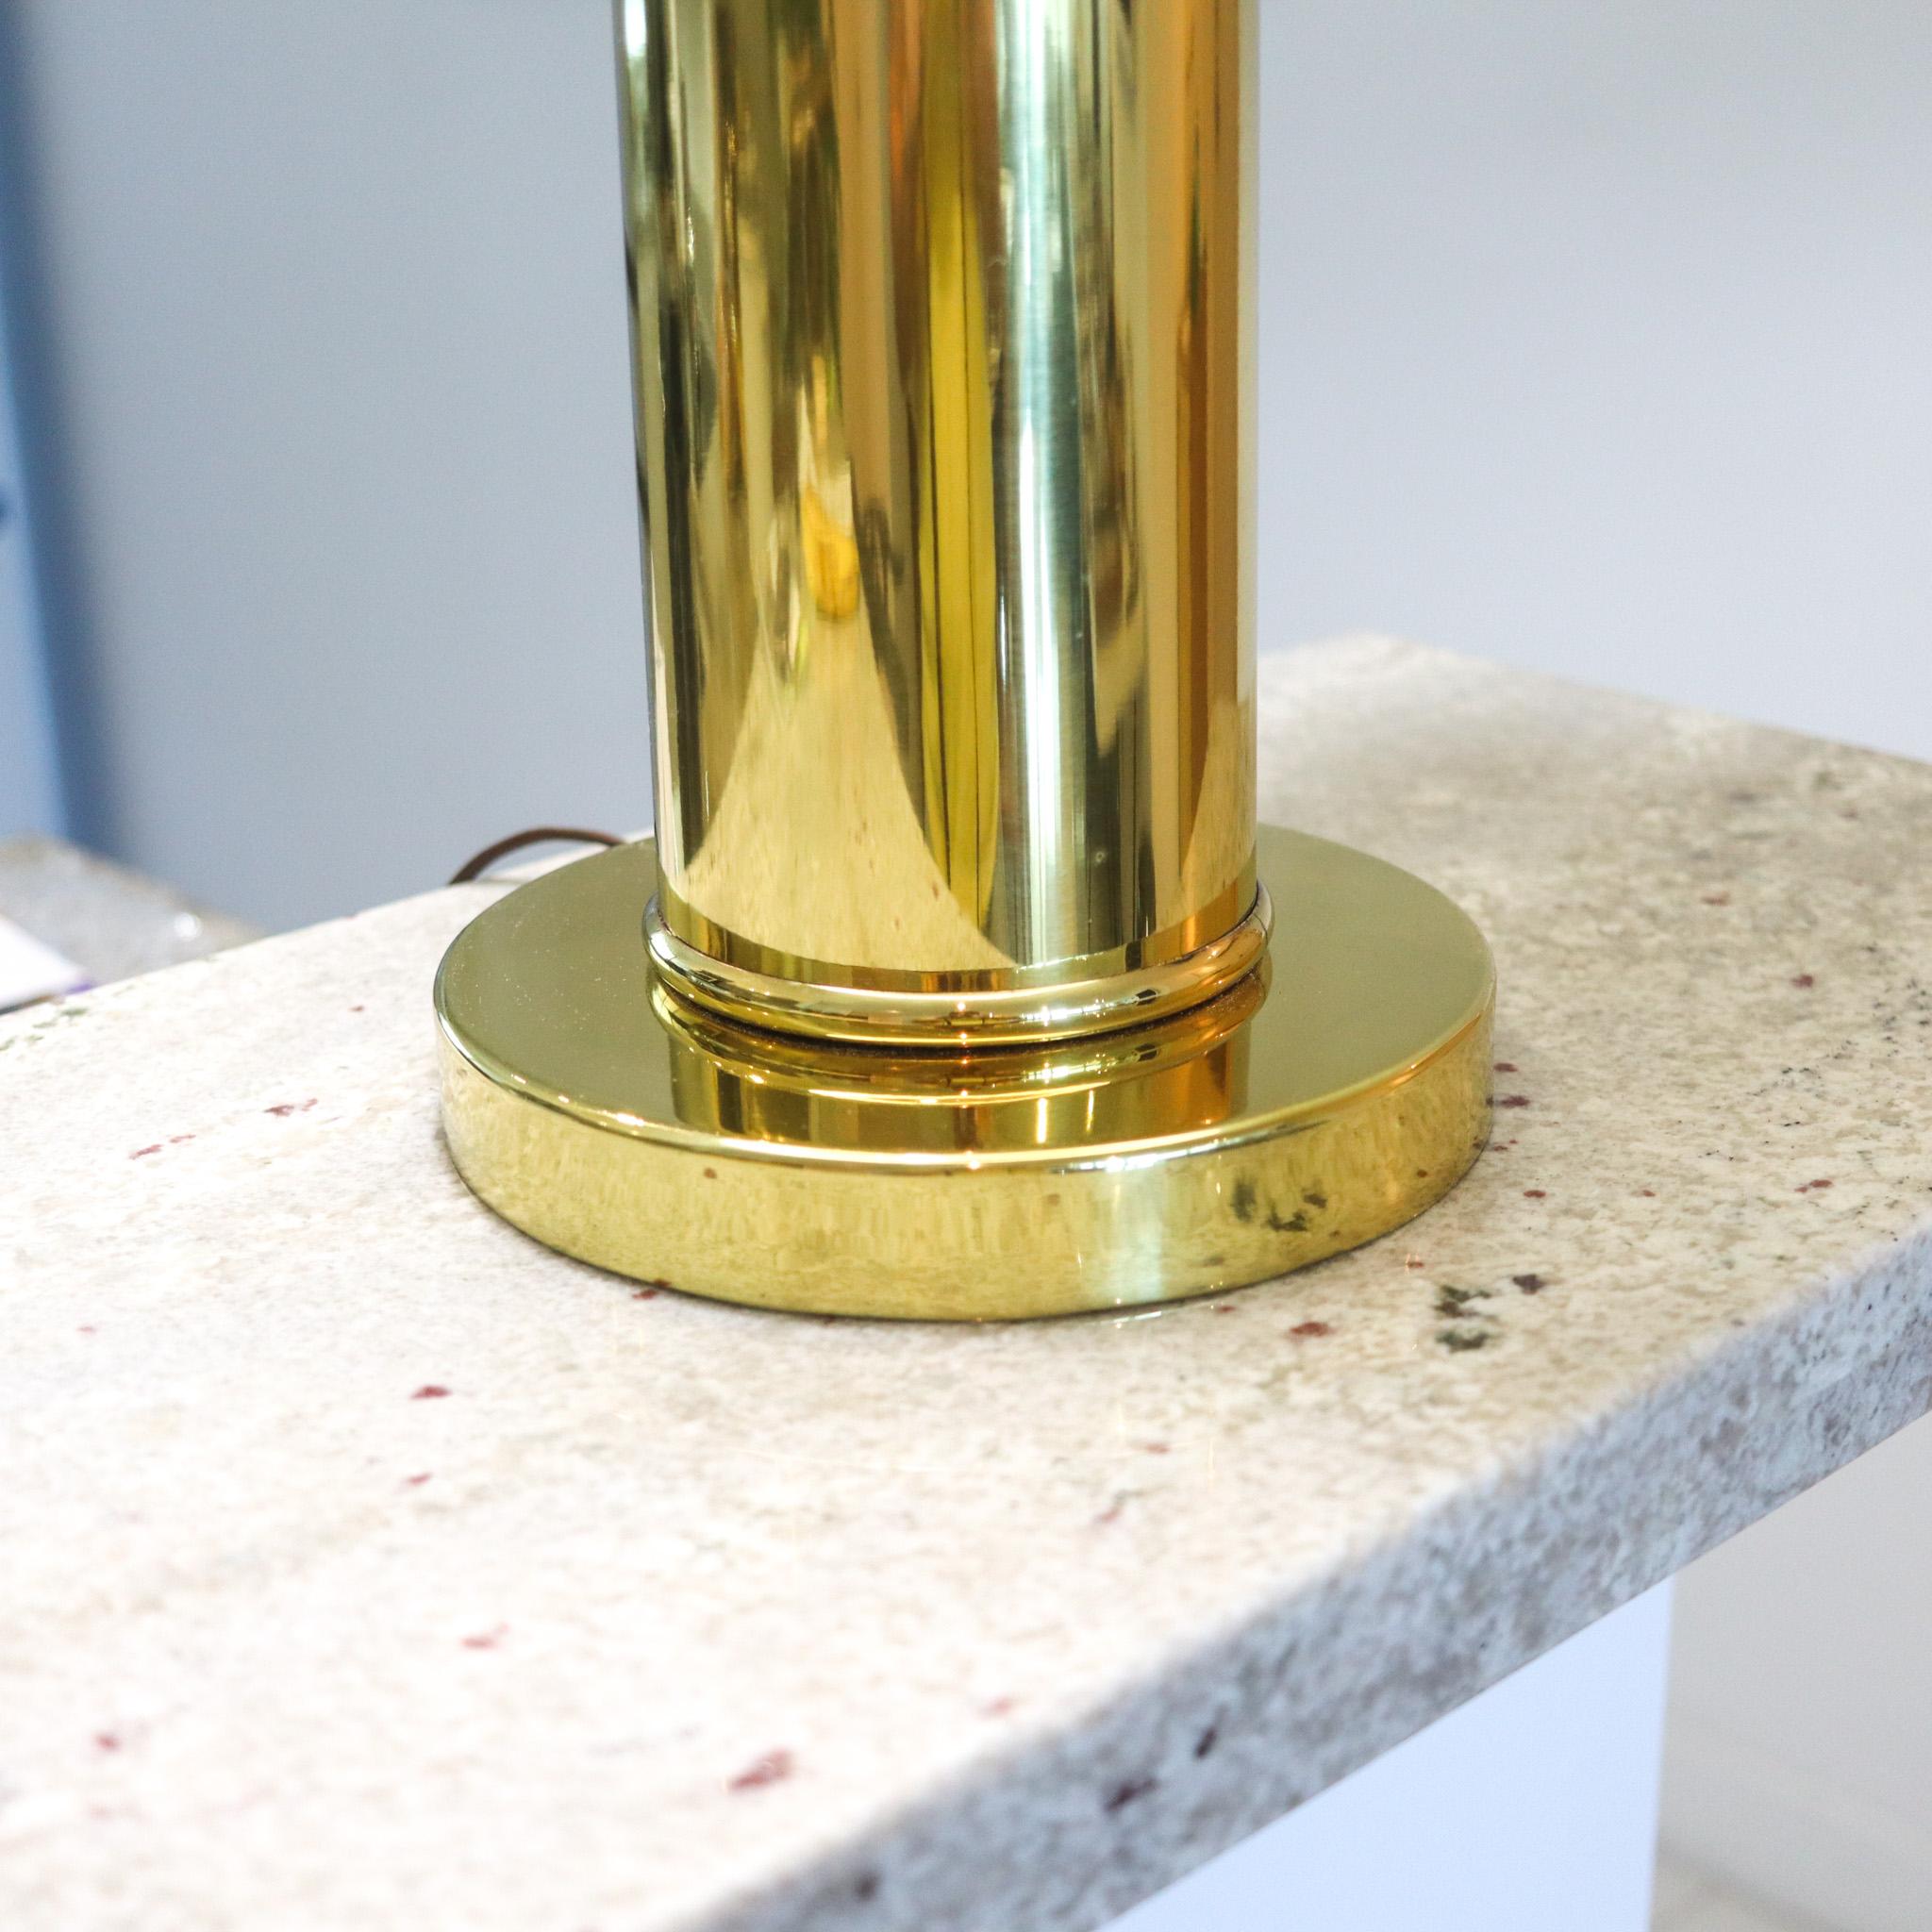 Mid-Century Modern George Kovacs 1960 Mid Century Modern Large Desk-Table Lamp In Polished Brass For Sale